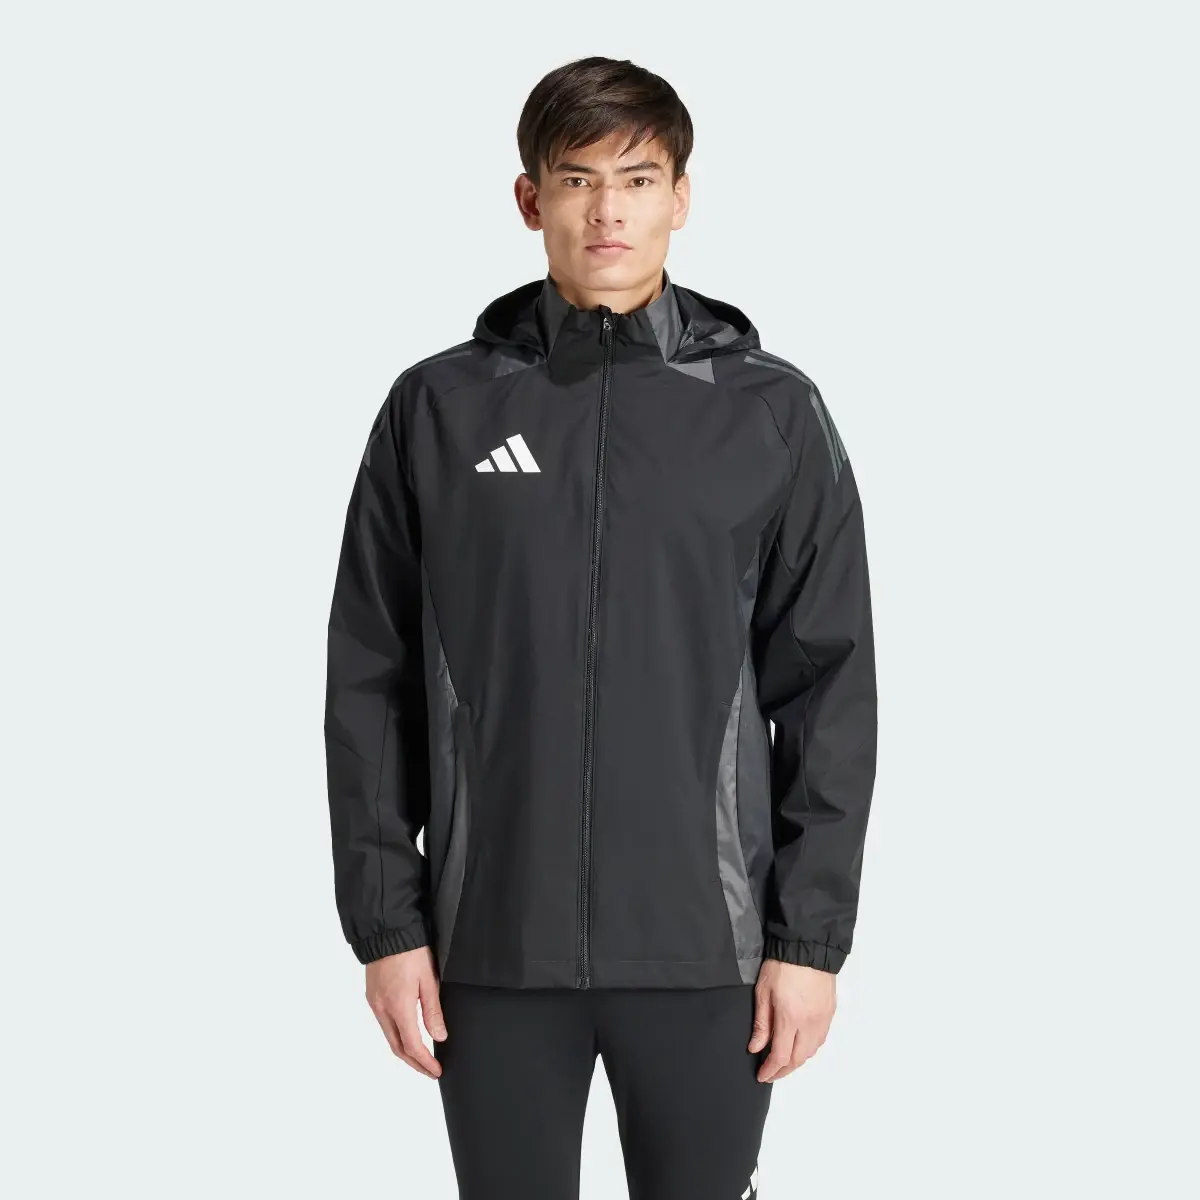 Adidas Tiro 24 Competition All-Weather Jacket. 2